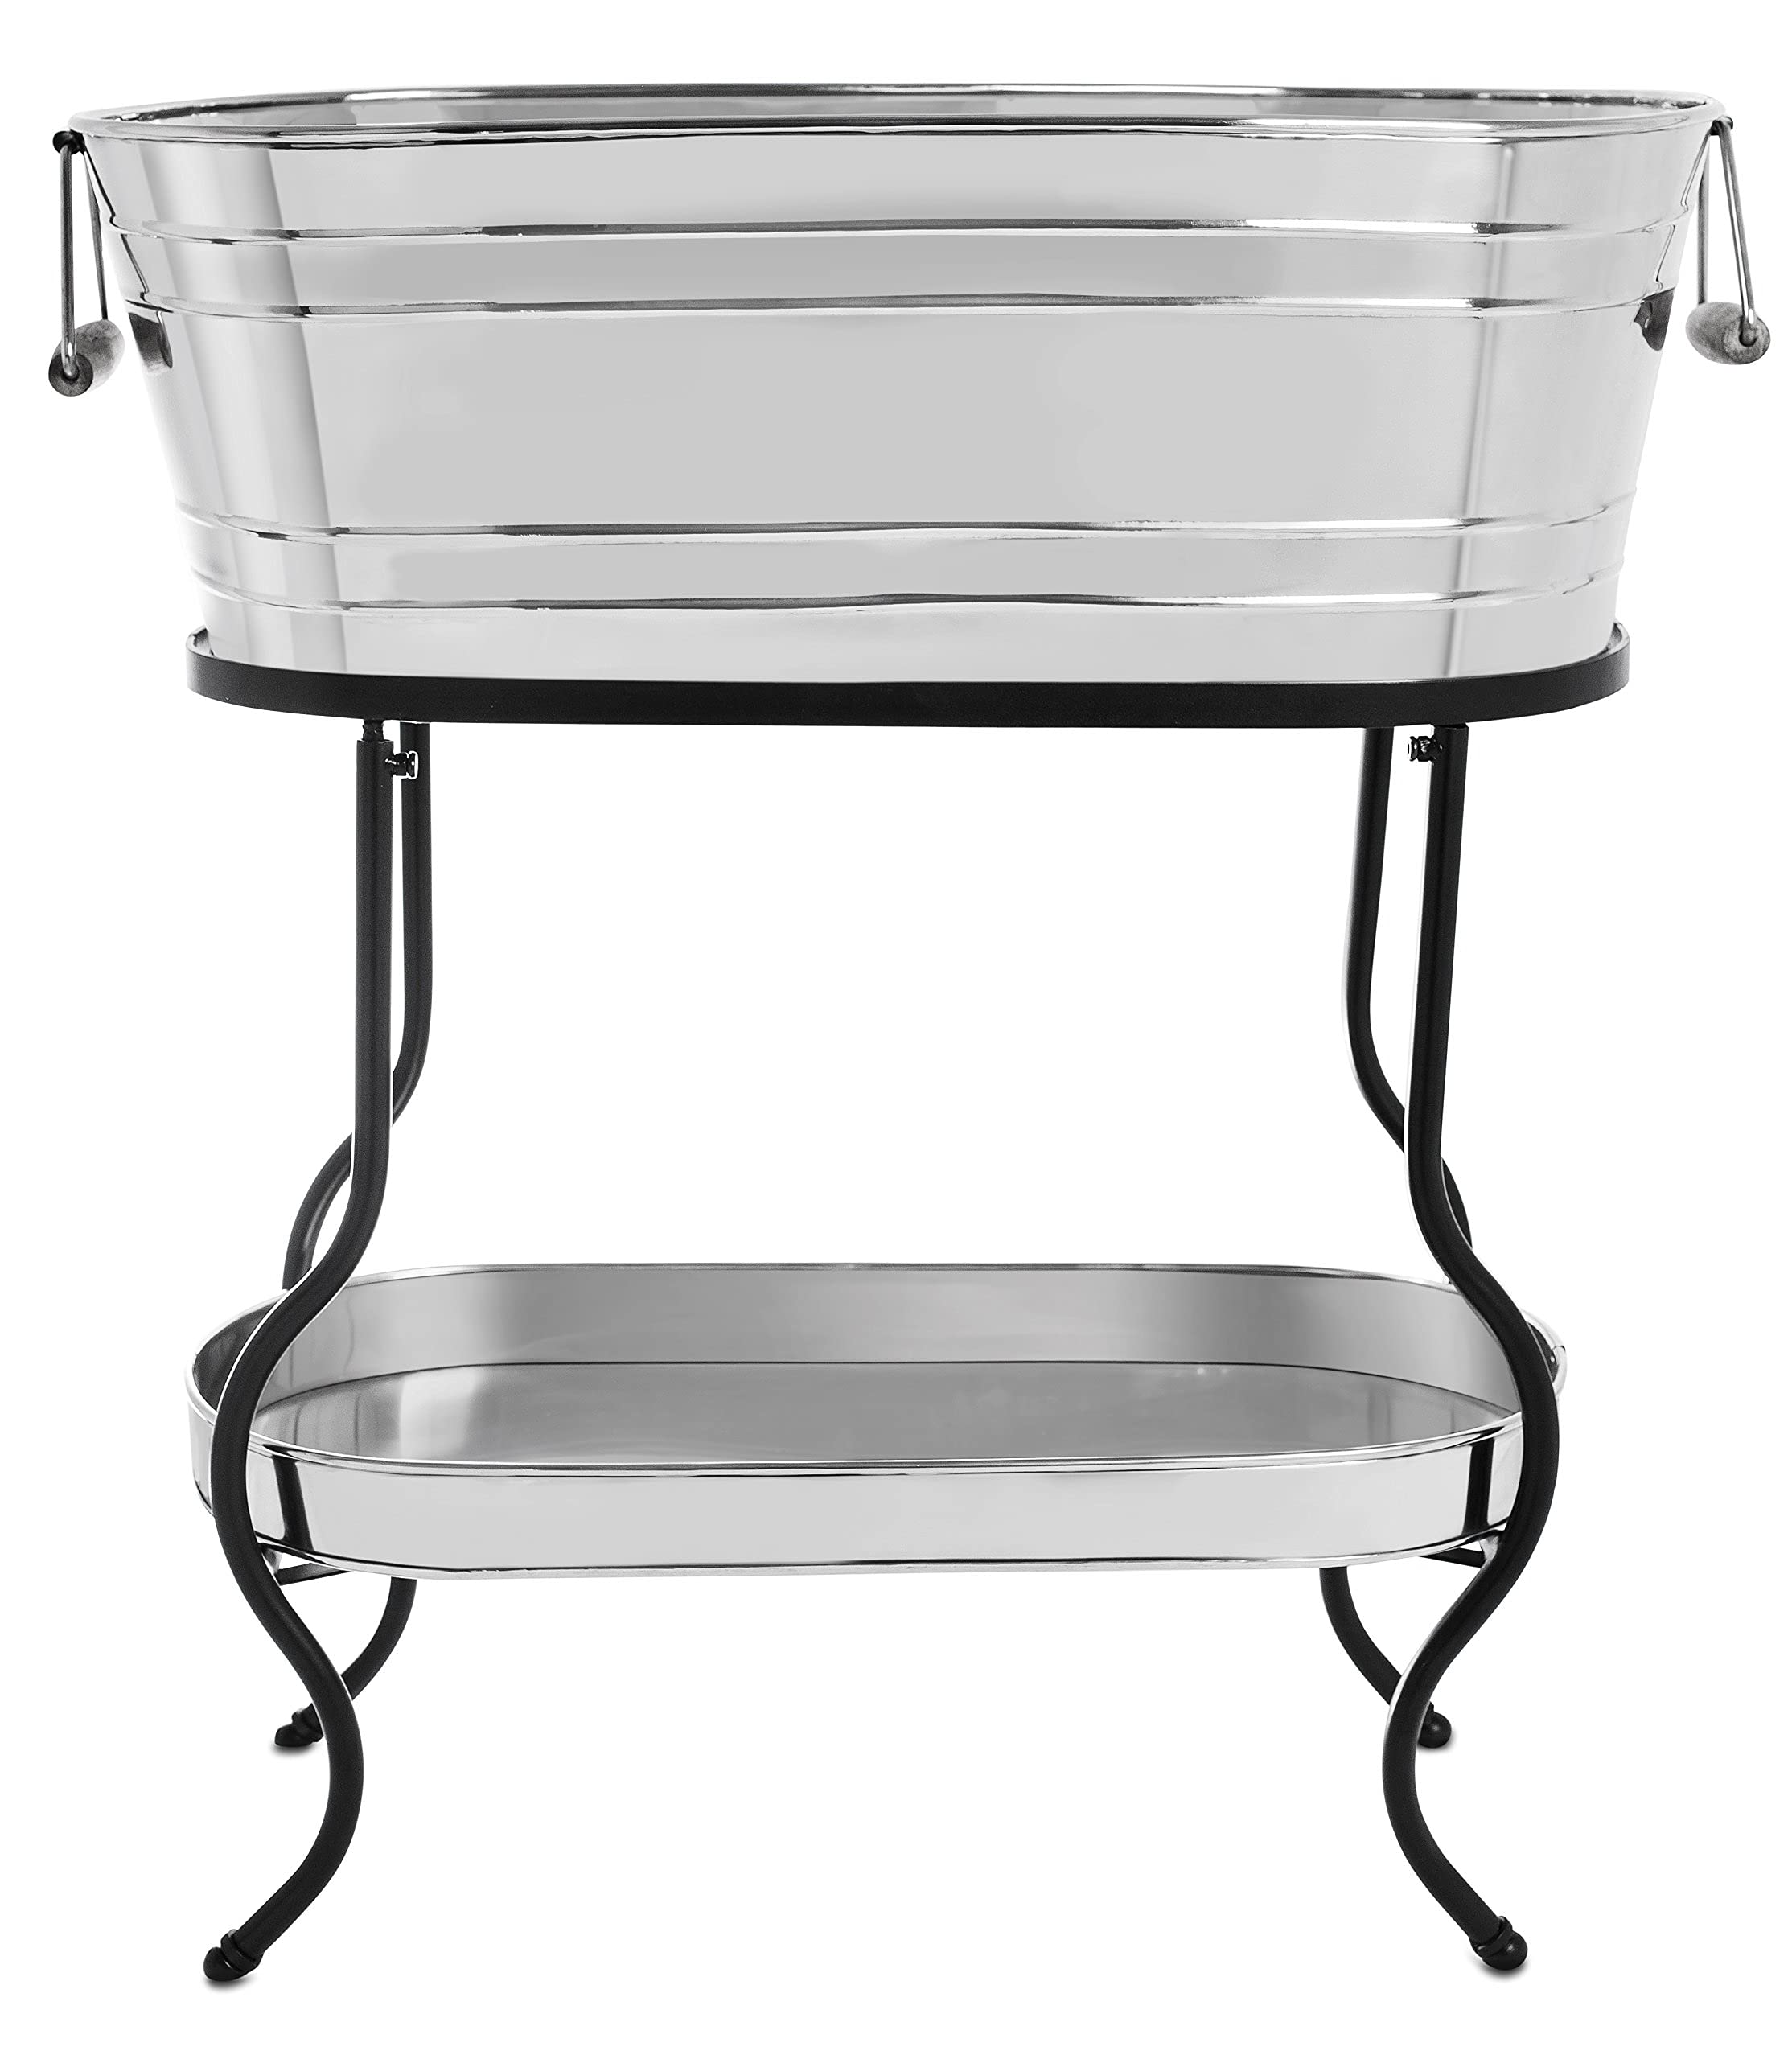 BIRDROCK HOME Stainless Steel Beverage Tub with Stand - Bottom Tray - Ice Bucket - Party Drink Holder - Wooden Handles - Outdoor or Indoor Use - Free Standing